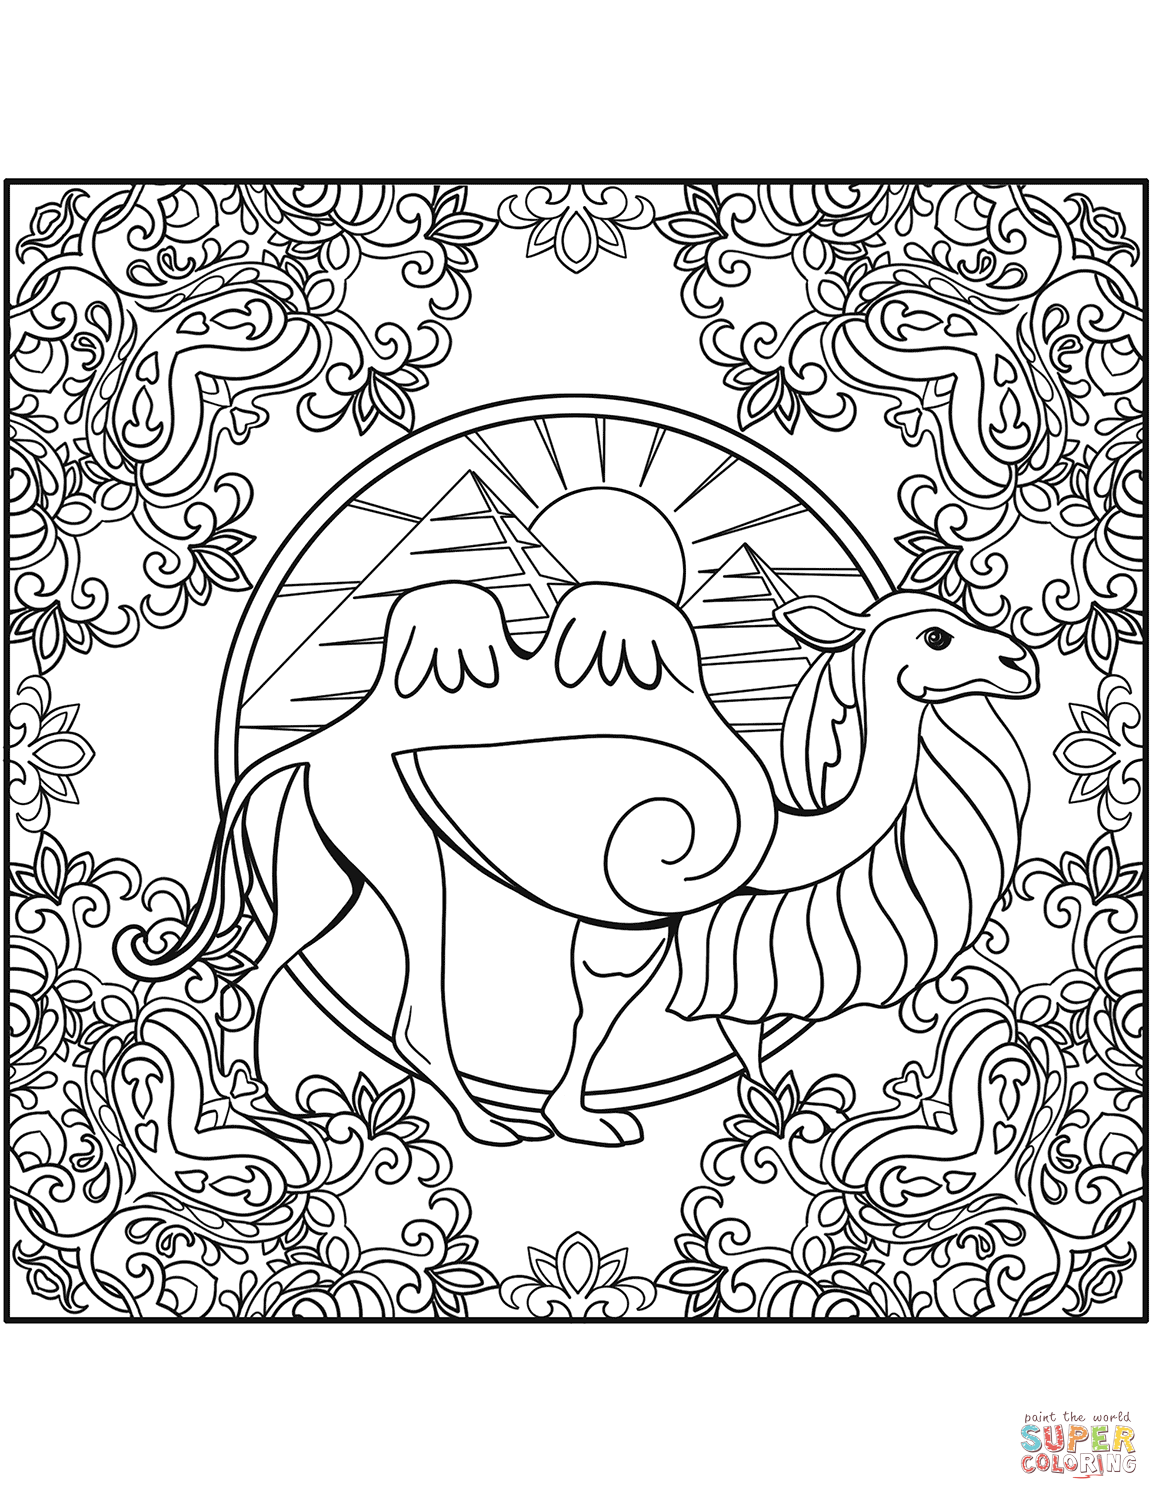 Animal mandalas coloring pages | Free Coloring Pages